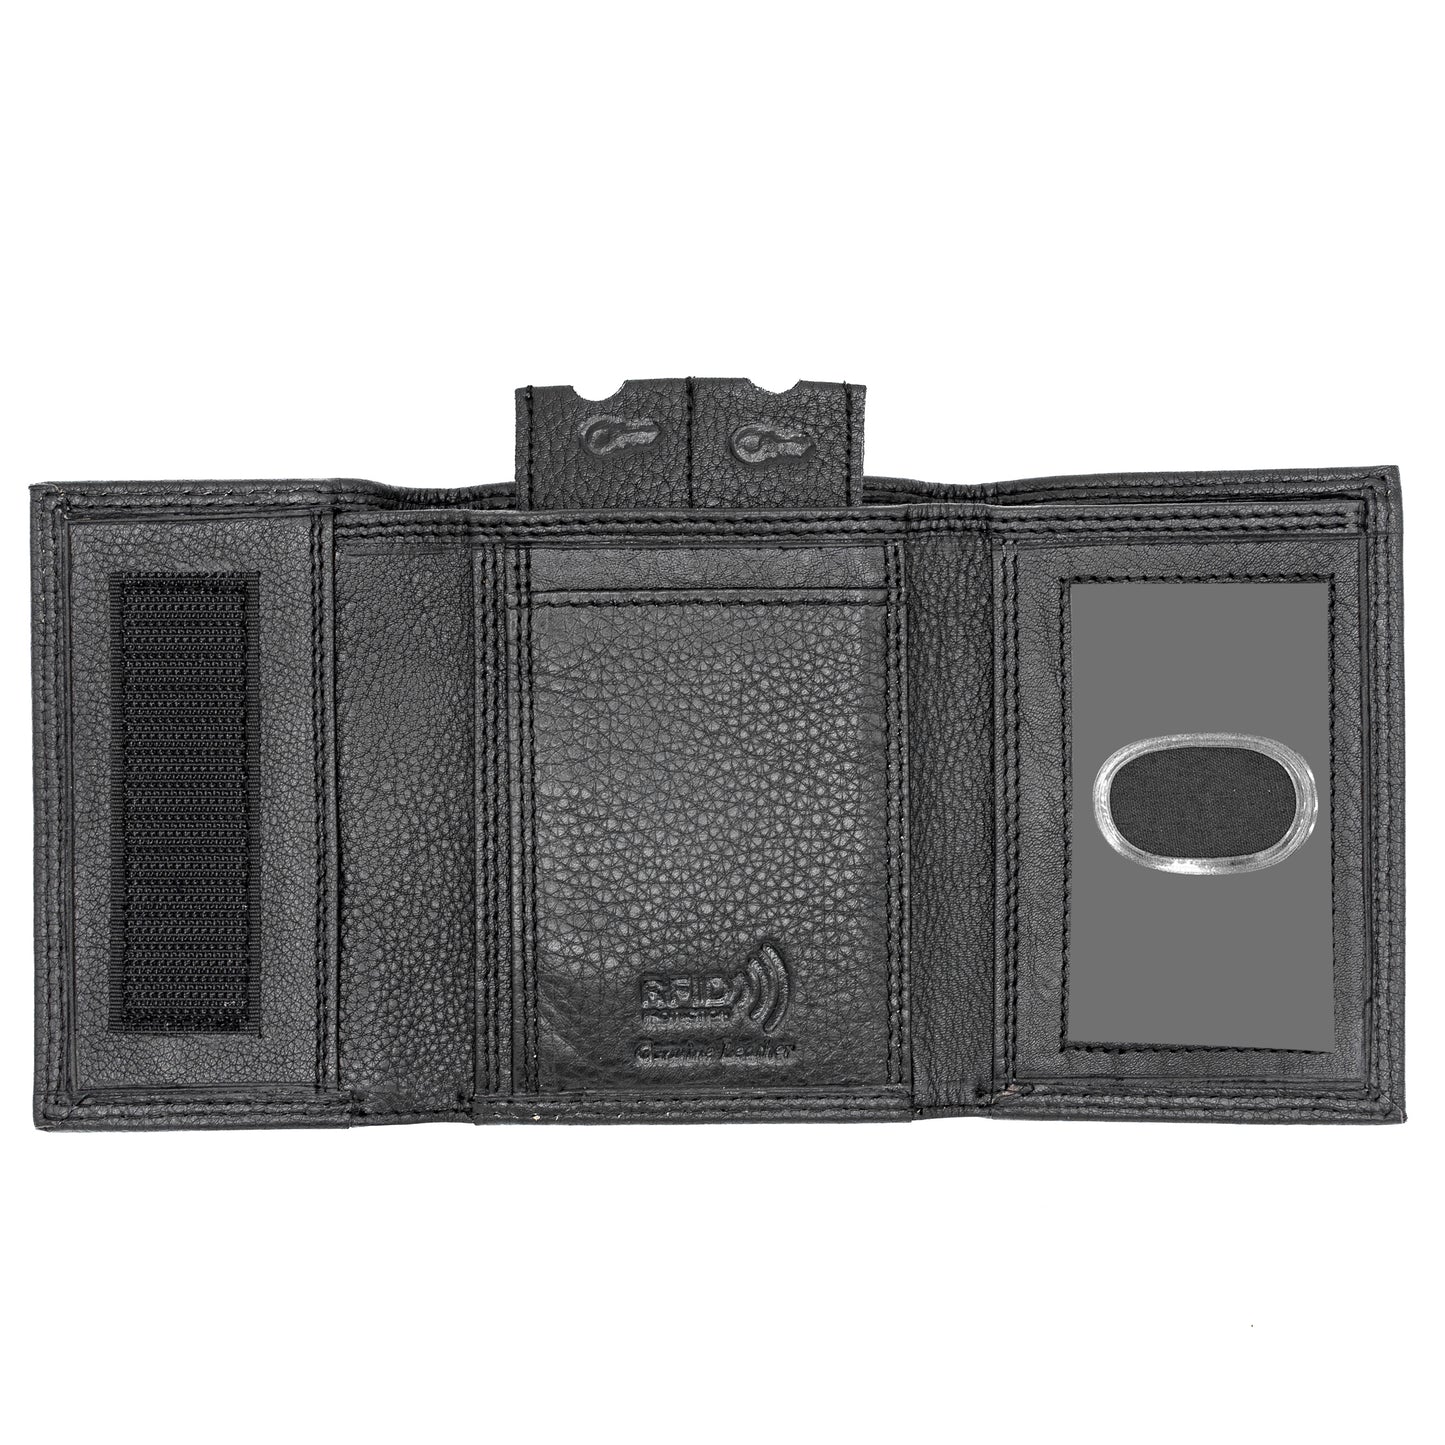 Men's Leather Trifold Wallet Black Velcro Closed RFID Blocking